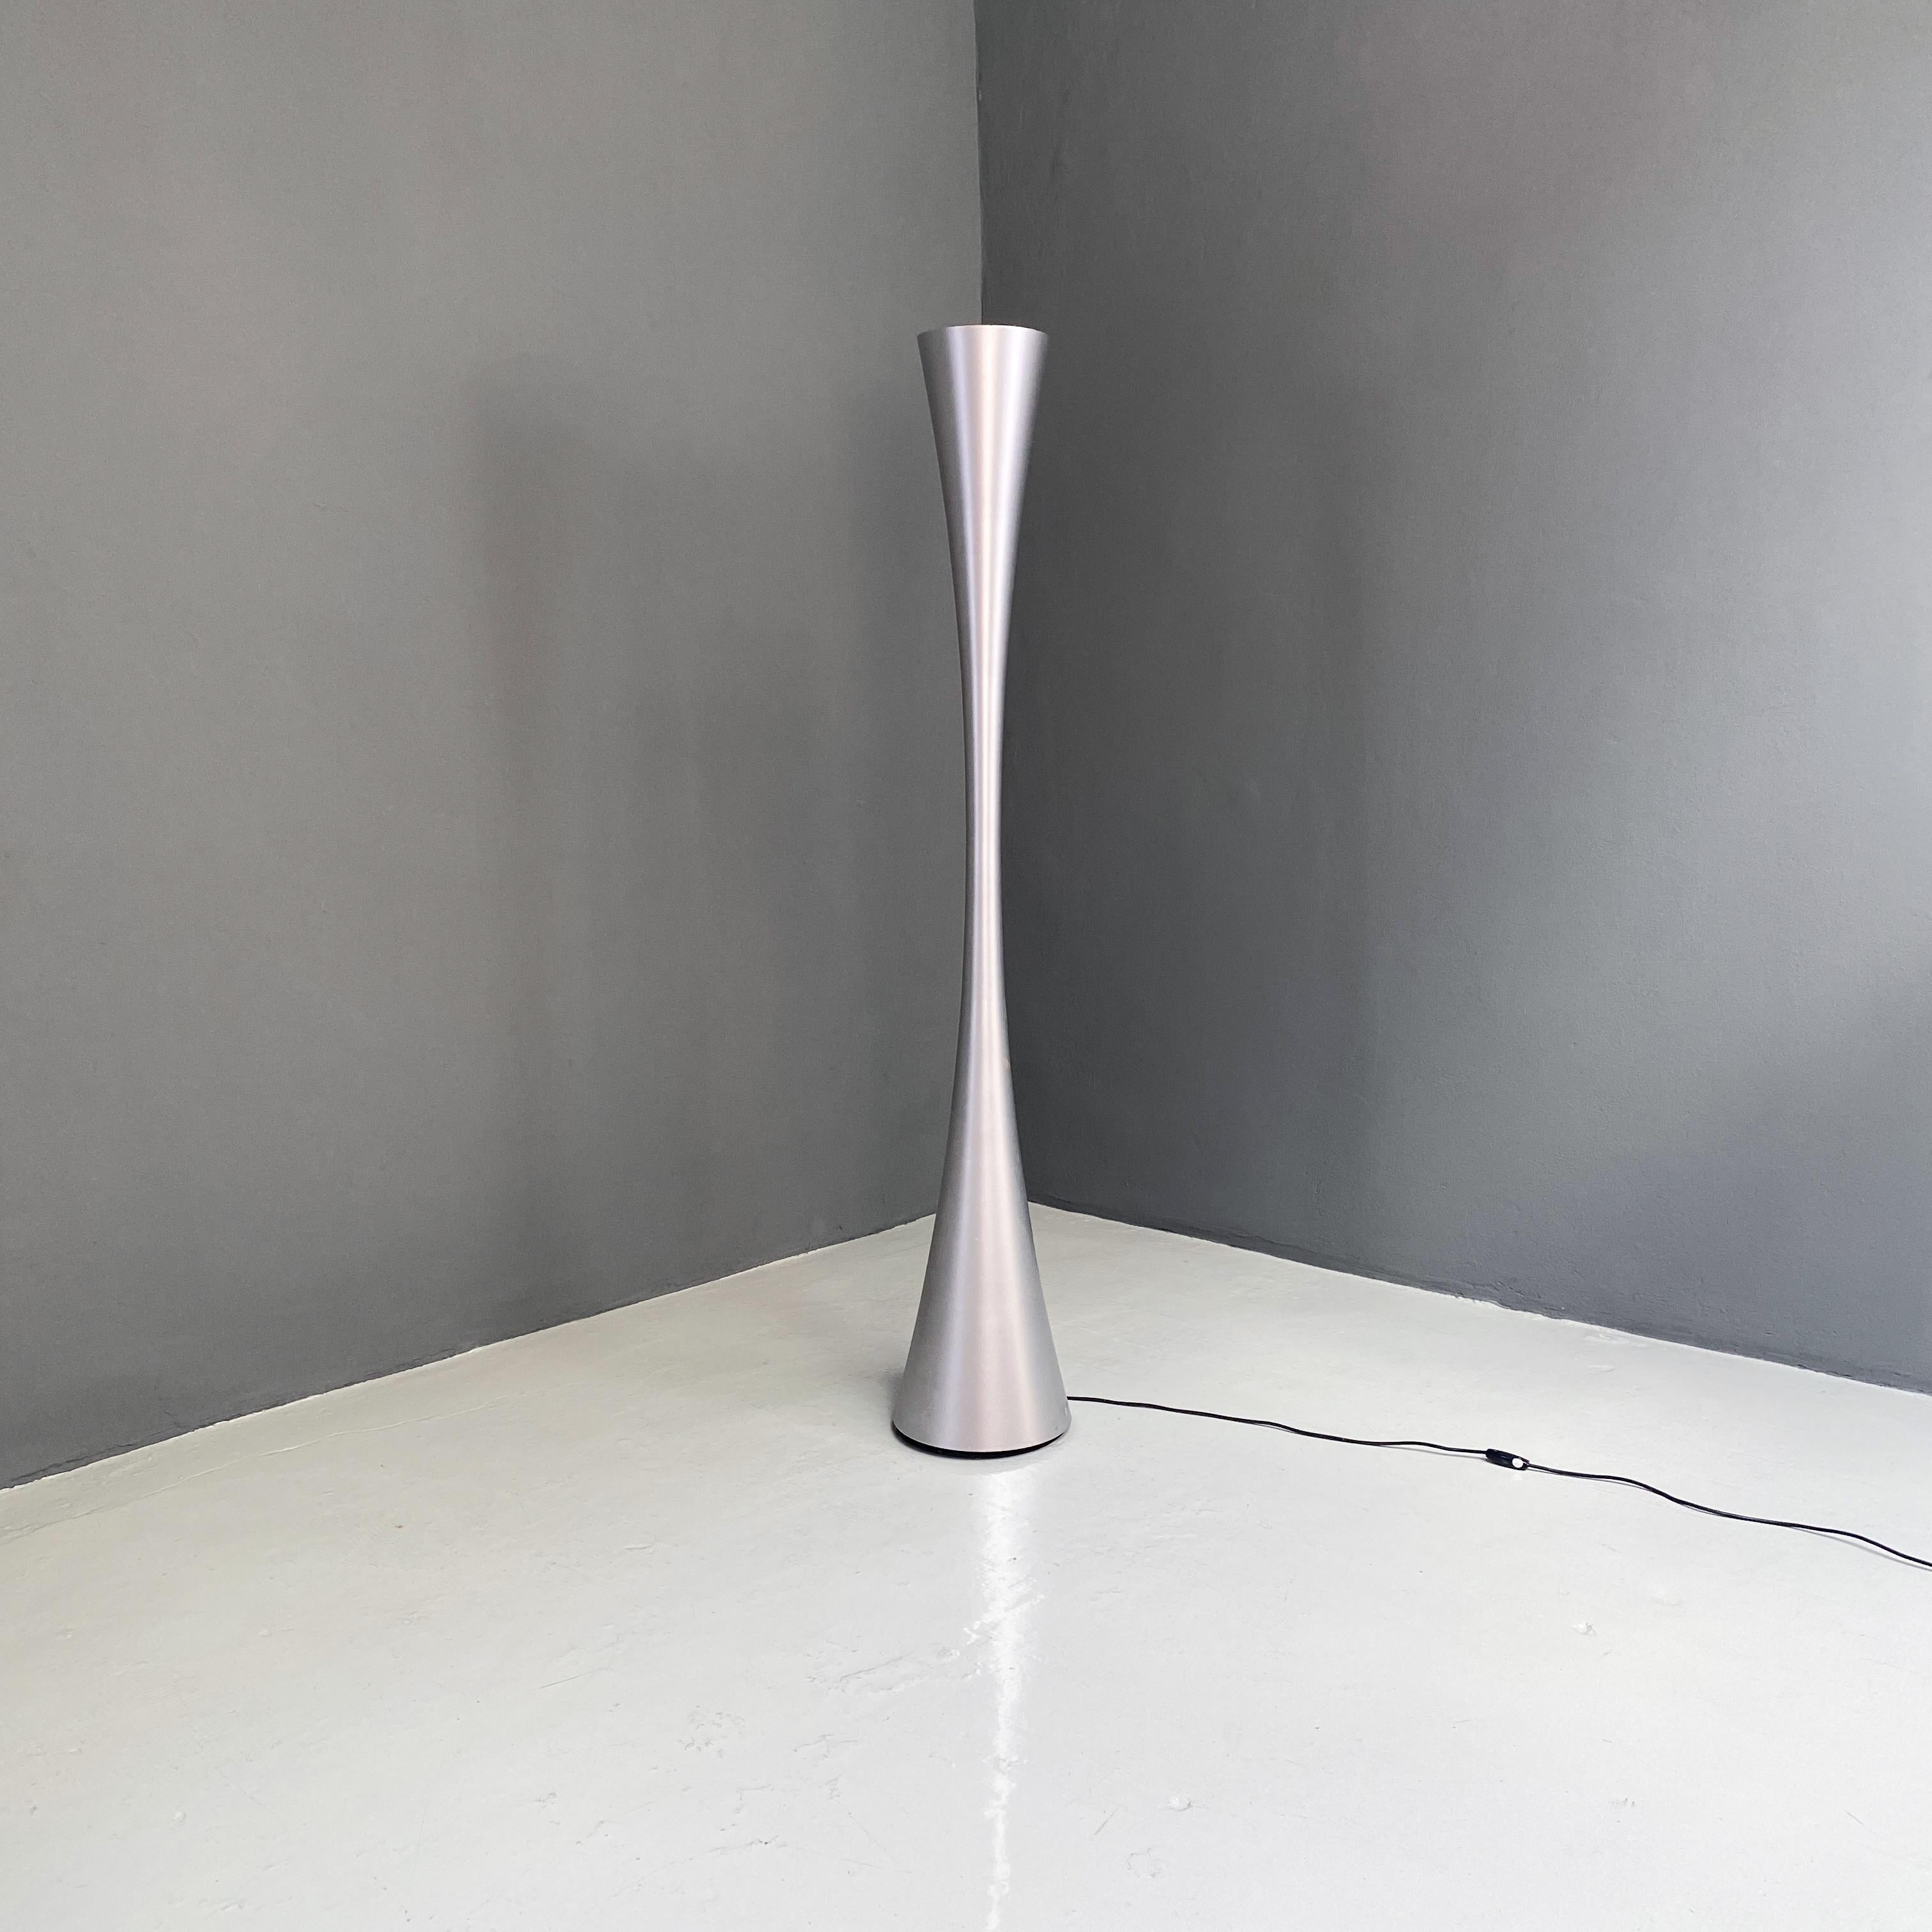 Italian modern chromed flared plastic floor lamp, 1990s
Fantastic luminator lamp very decorative and big alluminium flared floor lamp,
With plastic structure and indirect light emission. 
it run with and E27 bulb led or not and can be used 120v or